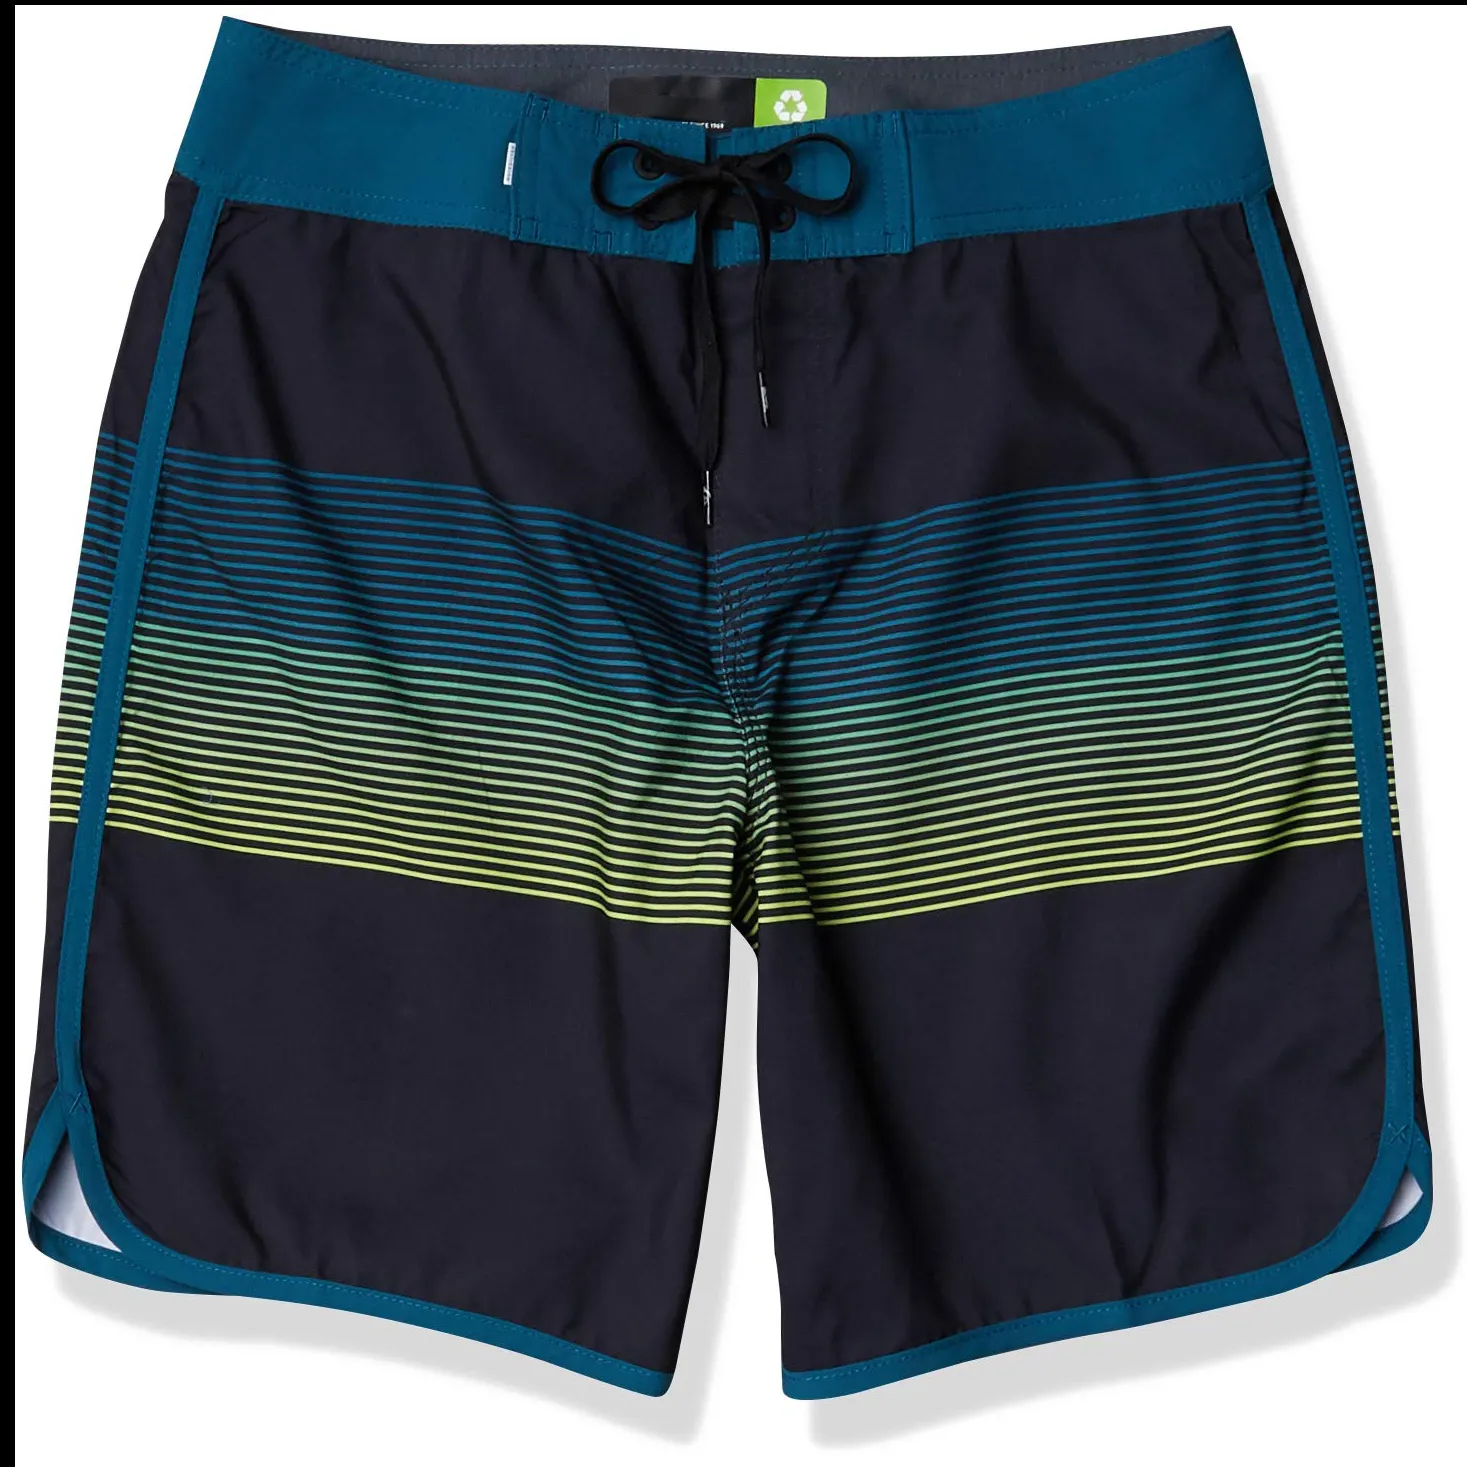 Hotsale Men's Lined Best Quality Everyday new design Grass Roots Boardshort Swimming Trunks